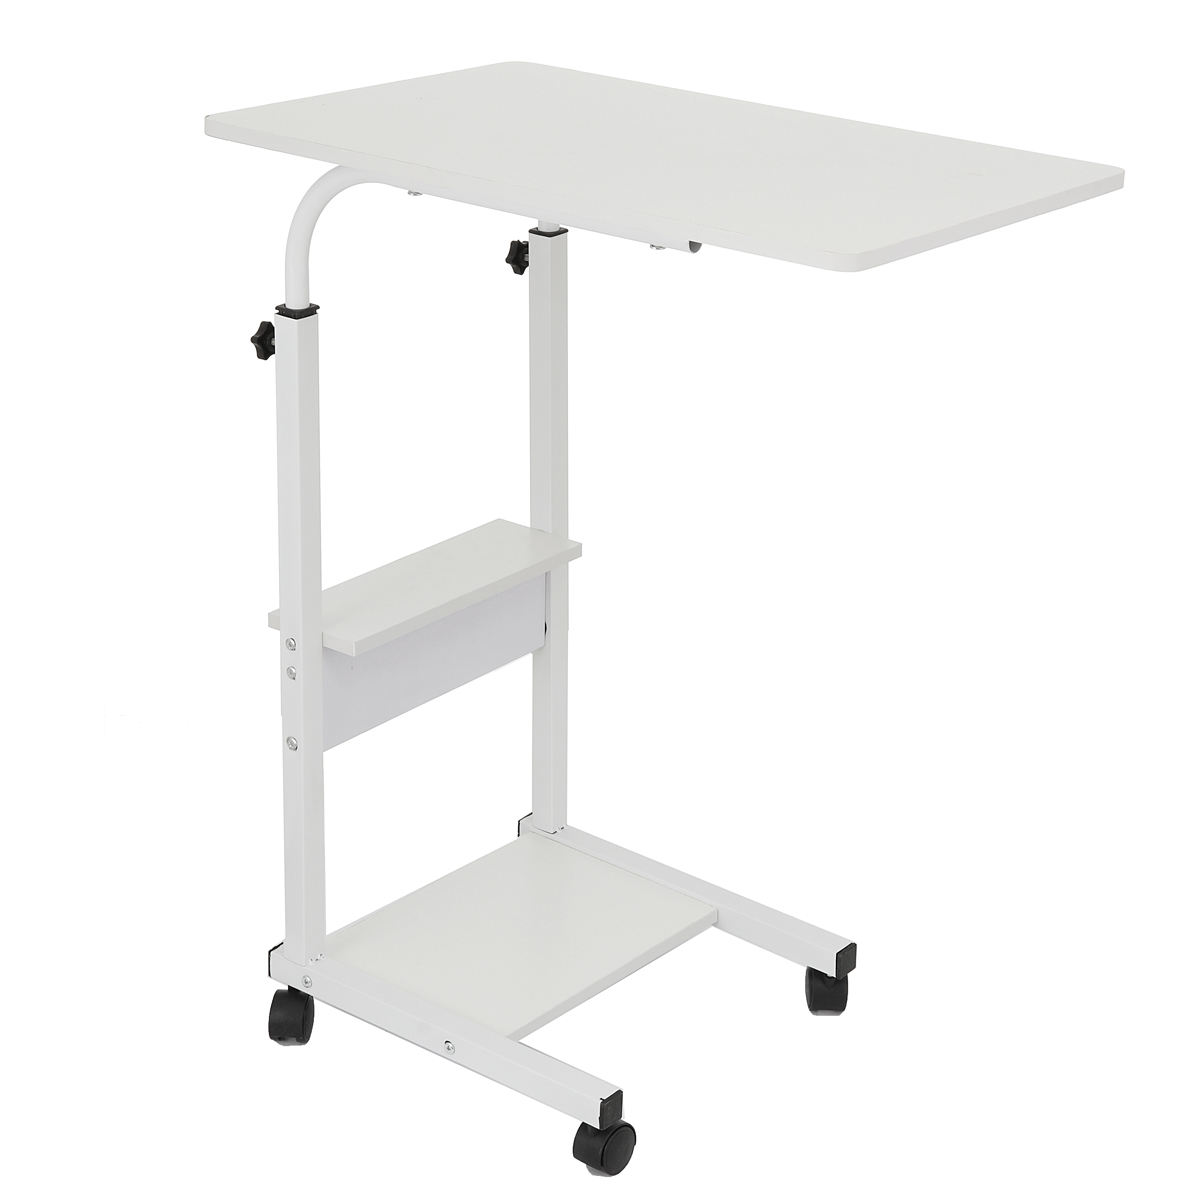 Movable-Laptop-Desk-Adjustable-Height-Computer-Notebook-Desk-Writing-Study-Table-Bedside-Tray-with-2-1750182-12